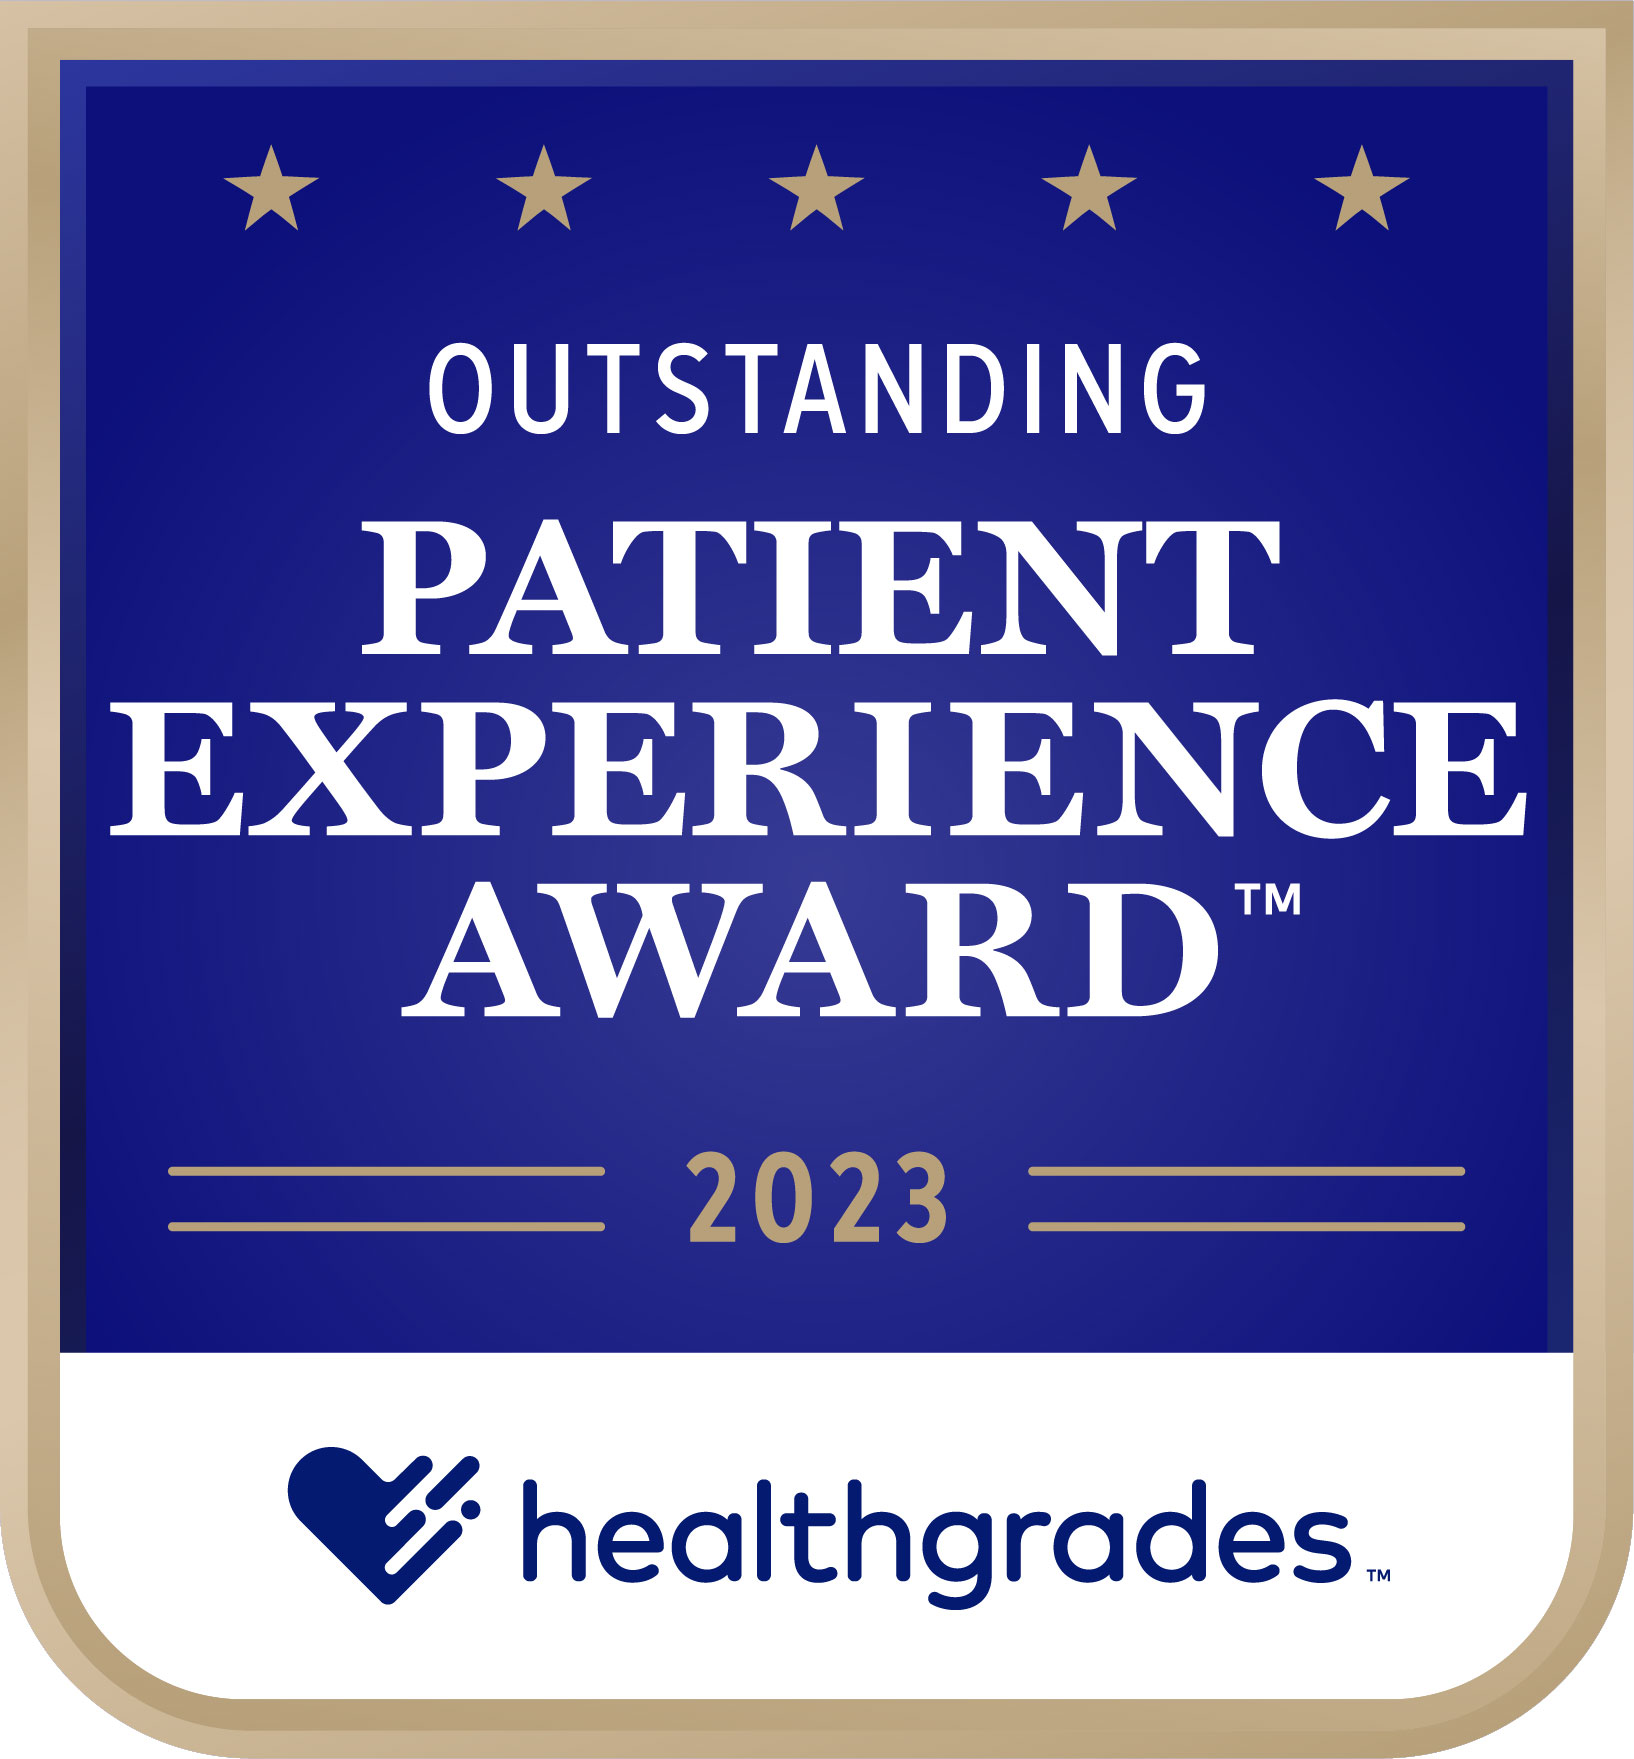 HG_Outstanding_Patient_Experience_Award_Image_2023.jpg